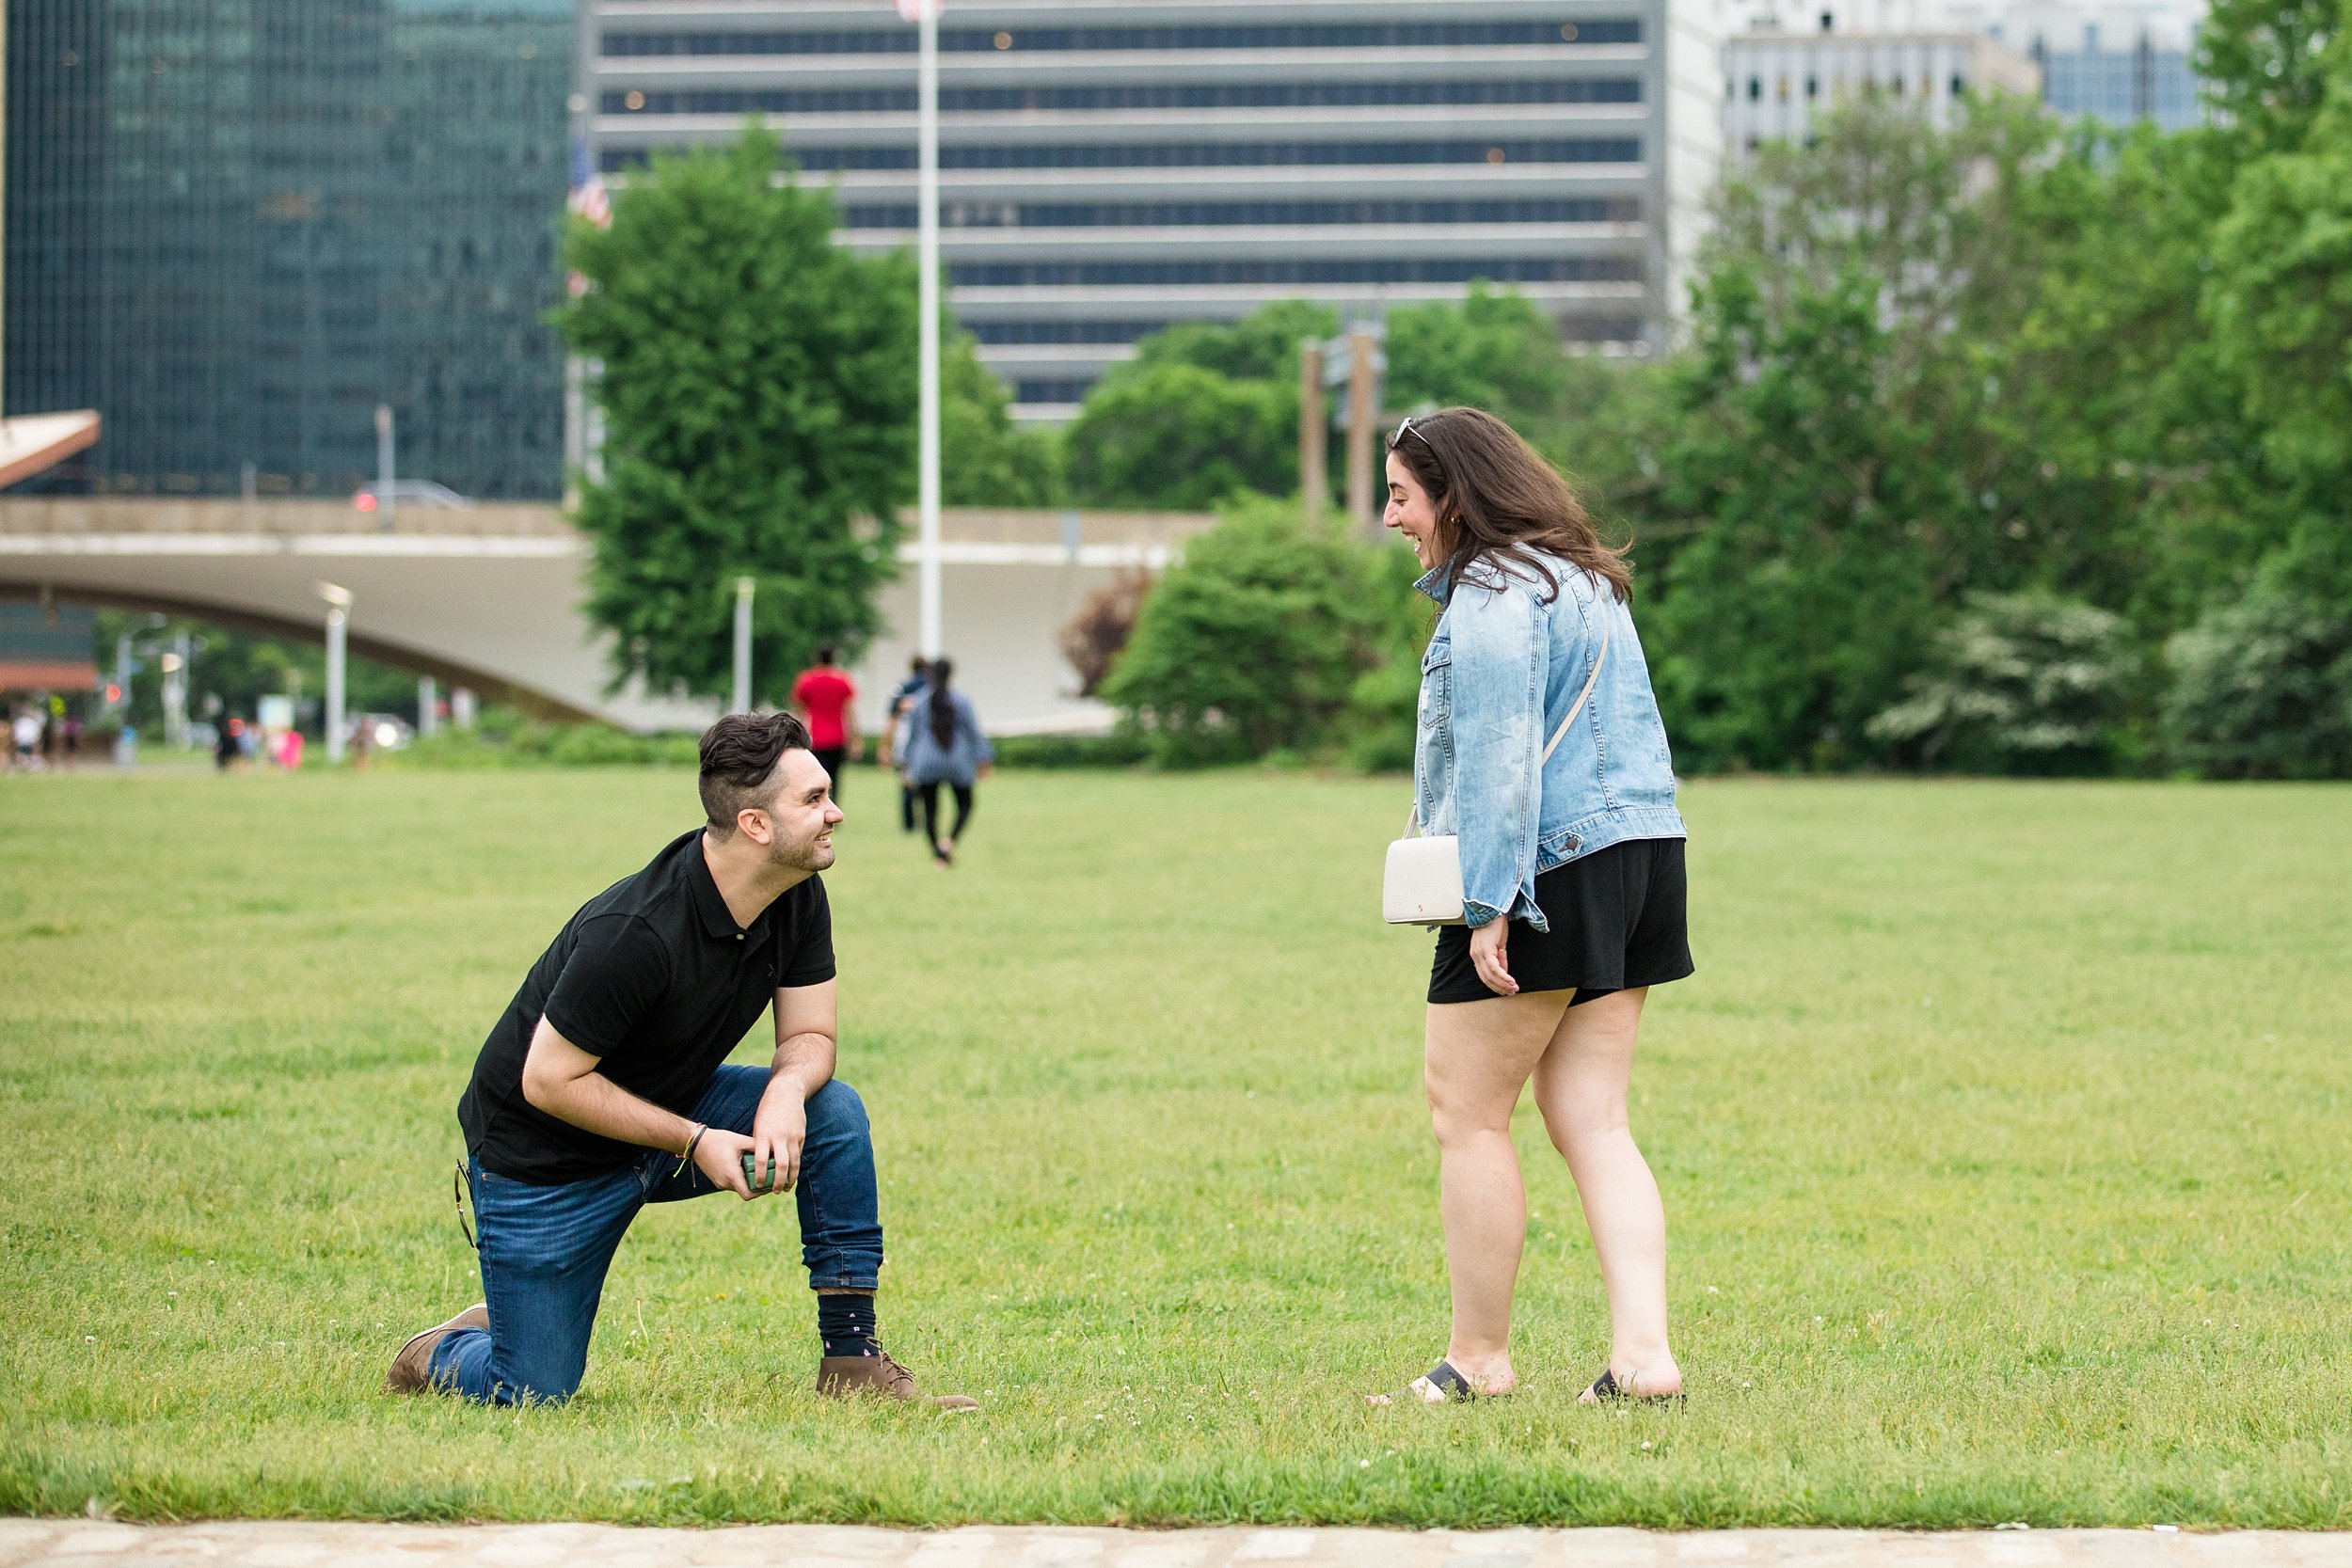 pittsburgh proposal photographer, the point pittsburgh proposal, point state park pittsburgh proposal, pittsburgh wedding photographer